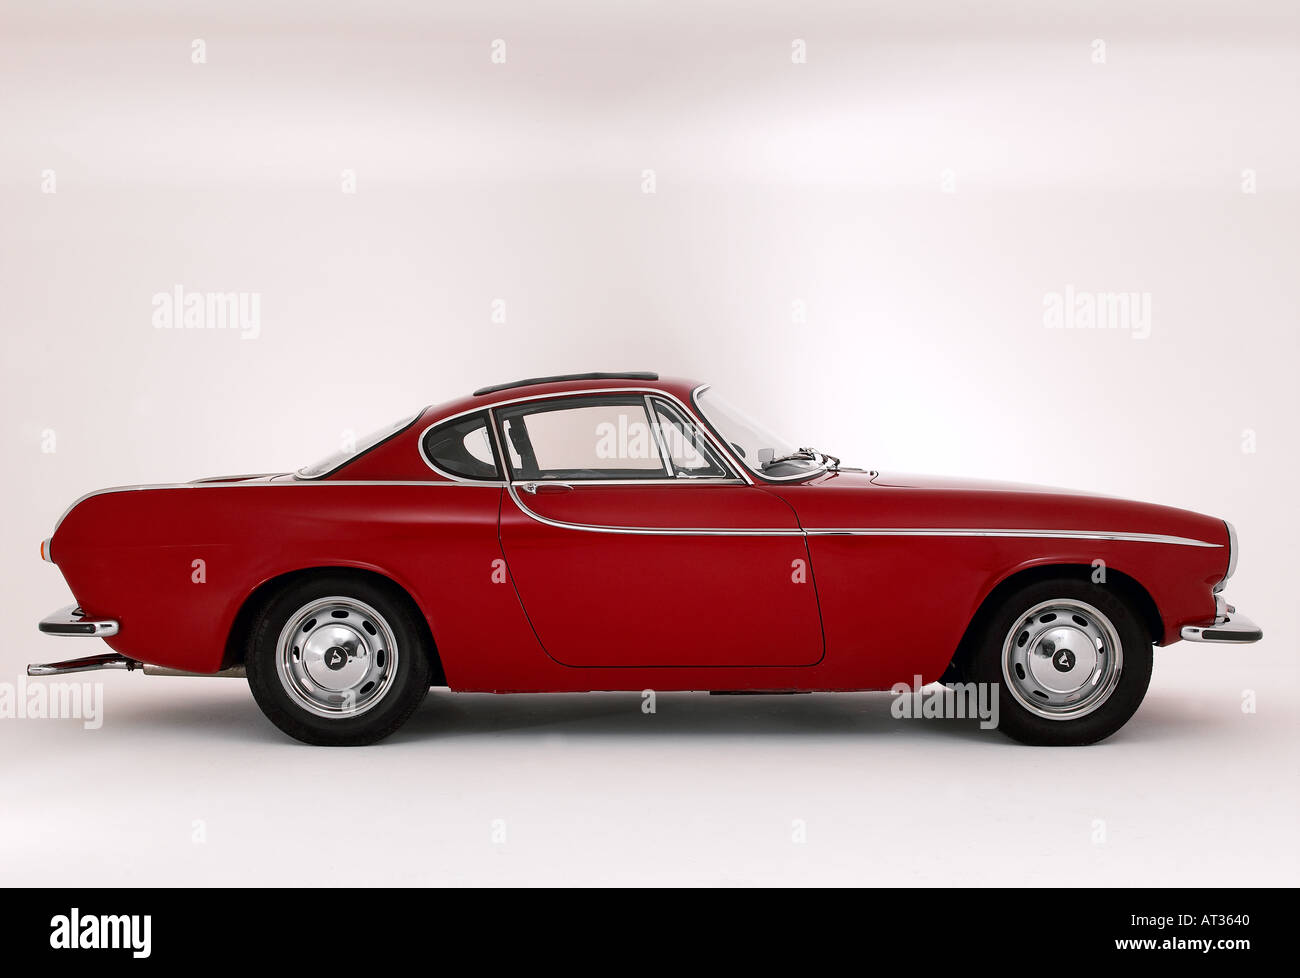 1965 Volvo 1800 Banque D'Images